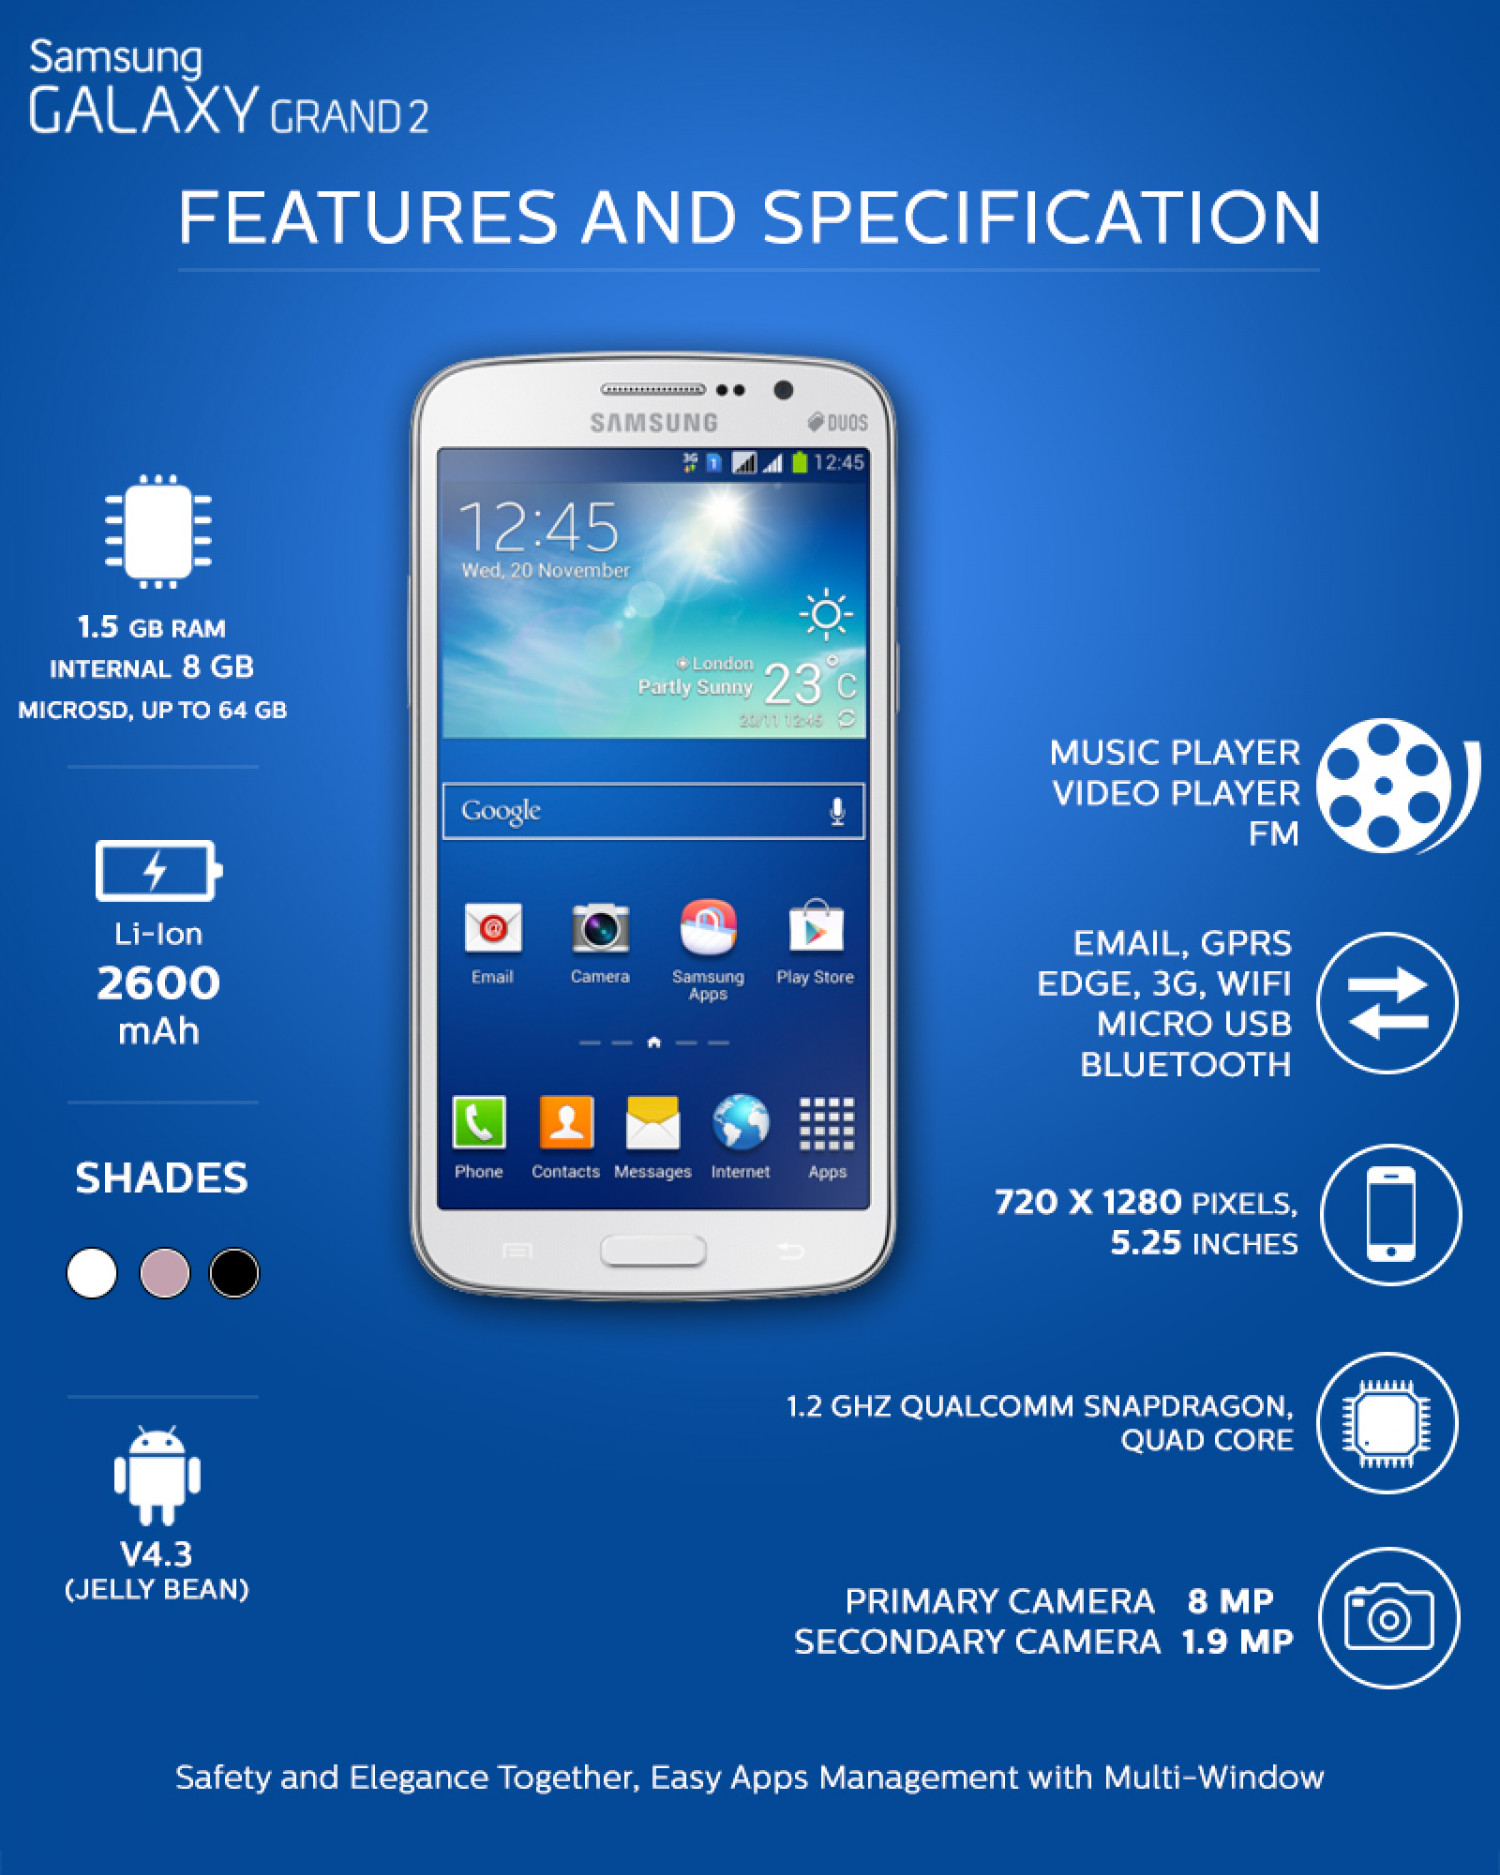 Samsung Galaxy Grand 2 : Features and Specification Infographic